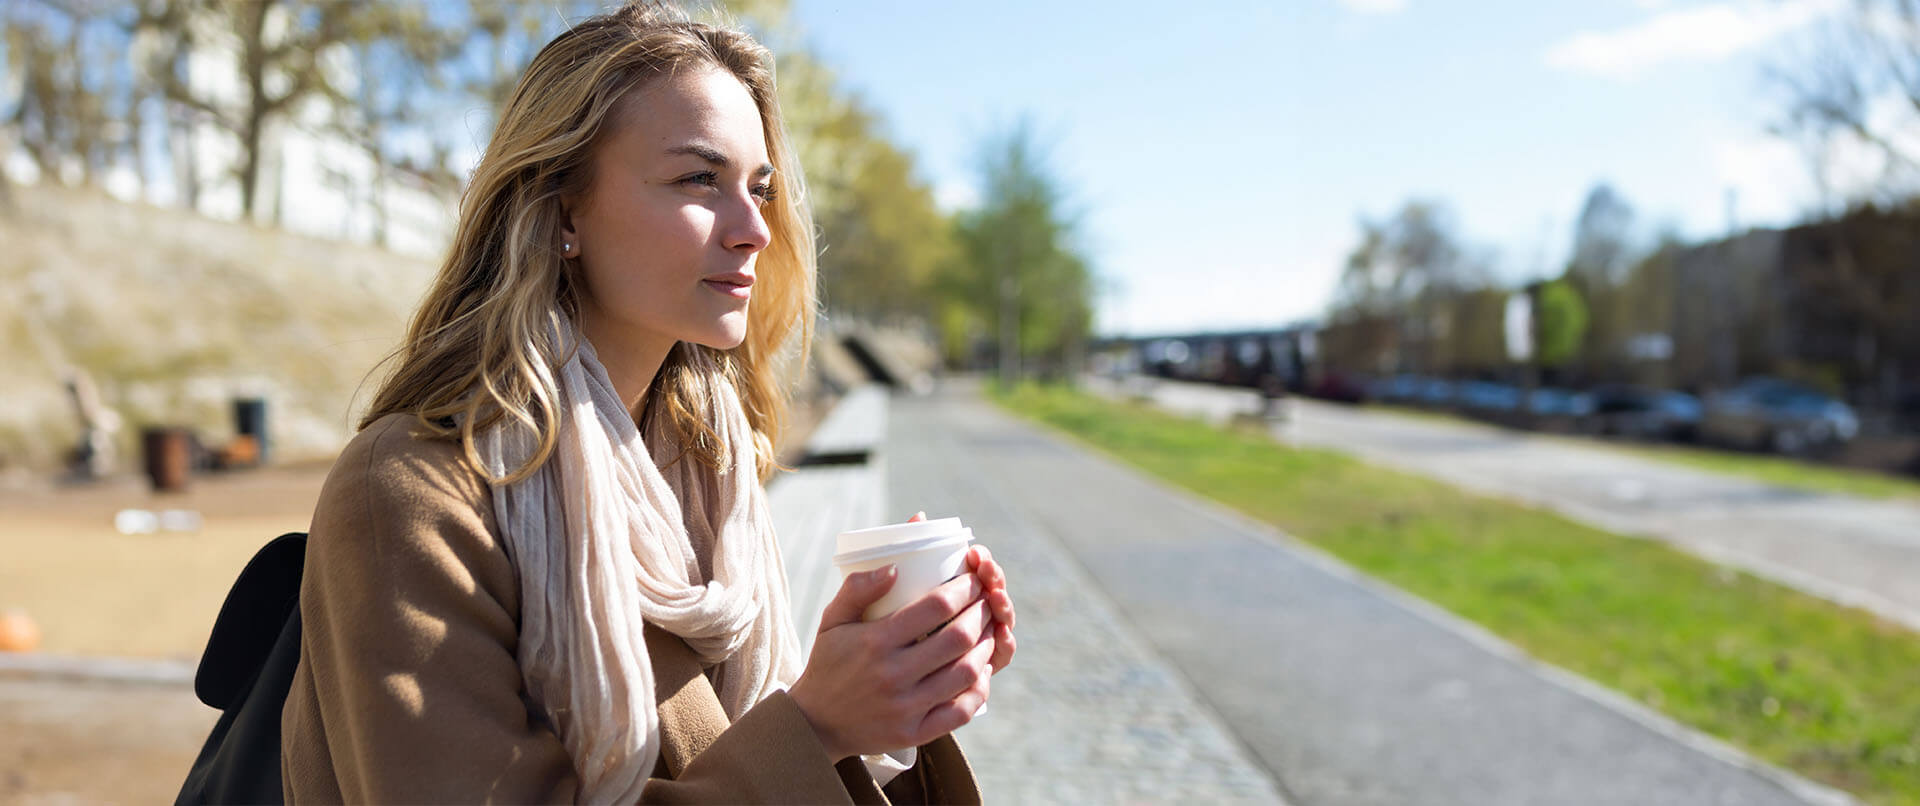 Contemplative woman sits on a sidewalk bench. Prescription drug addiction treatment in New York, NY can offer support. Contact a drug addiction therapist to learn more about narcotic addiction treatment in New York, NY. 10022